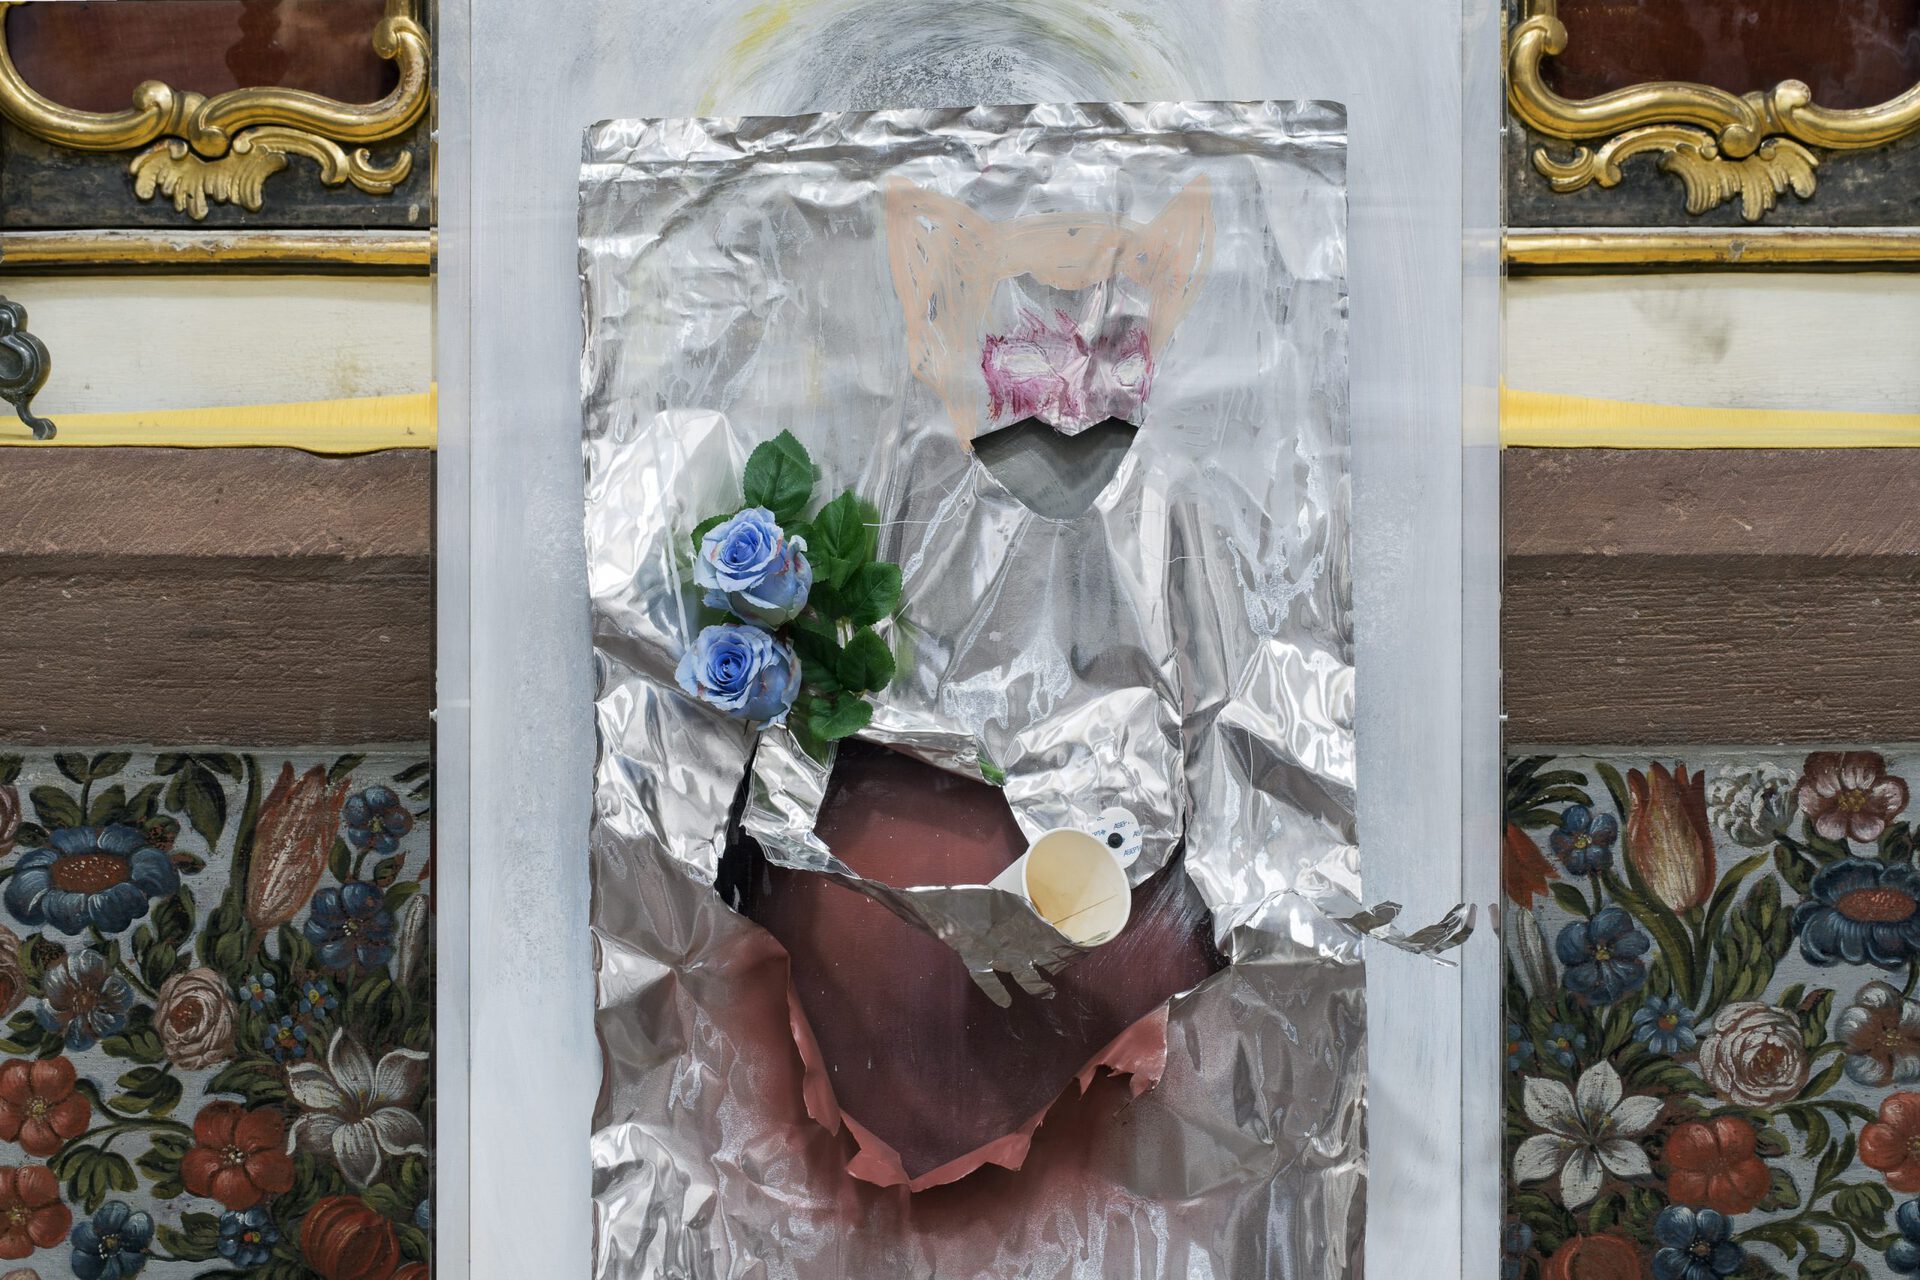 Jesse Darling, Our Lady Batman of the Empty Center (Temporary Relief), 2018 spray paint and ink on aluminum and wood, paper cup, cemetery flowers, gold leaf, finger sheaths, ECG stickers, Band-Aid wrappers, Perspex 134 × 65 × 25.5 cm detail  courtesy of the artist and Arcadia Missa Gallery, London